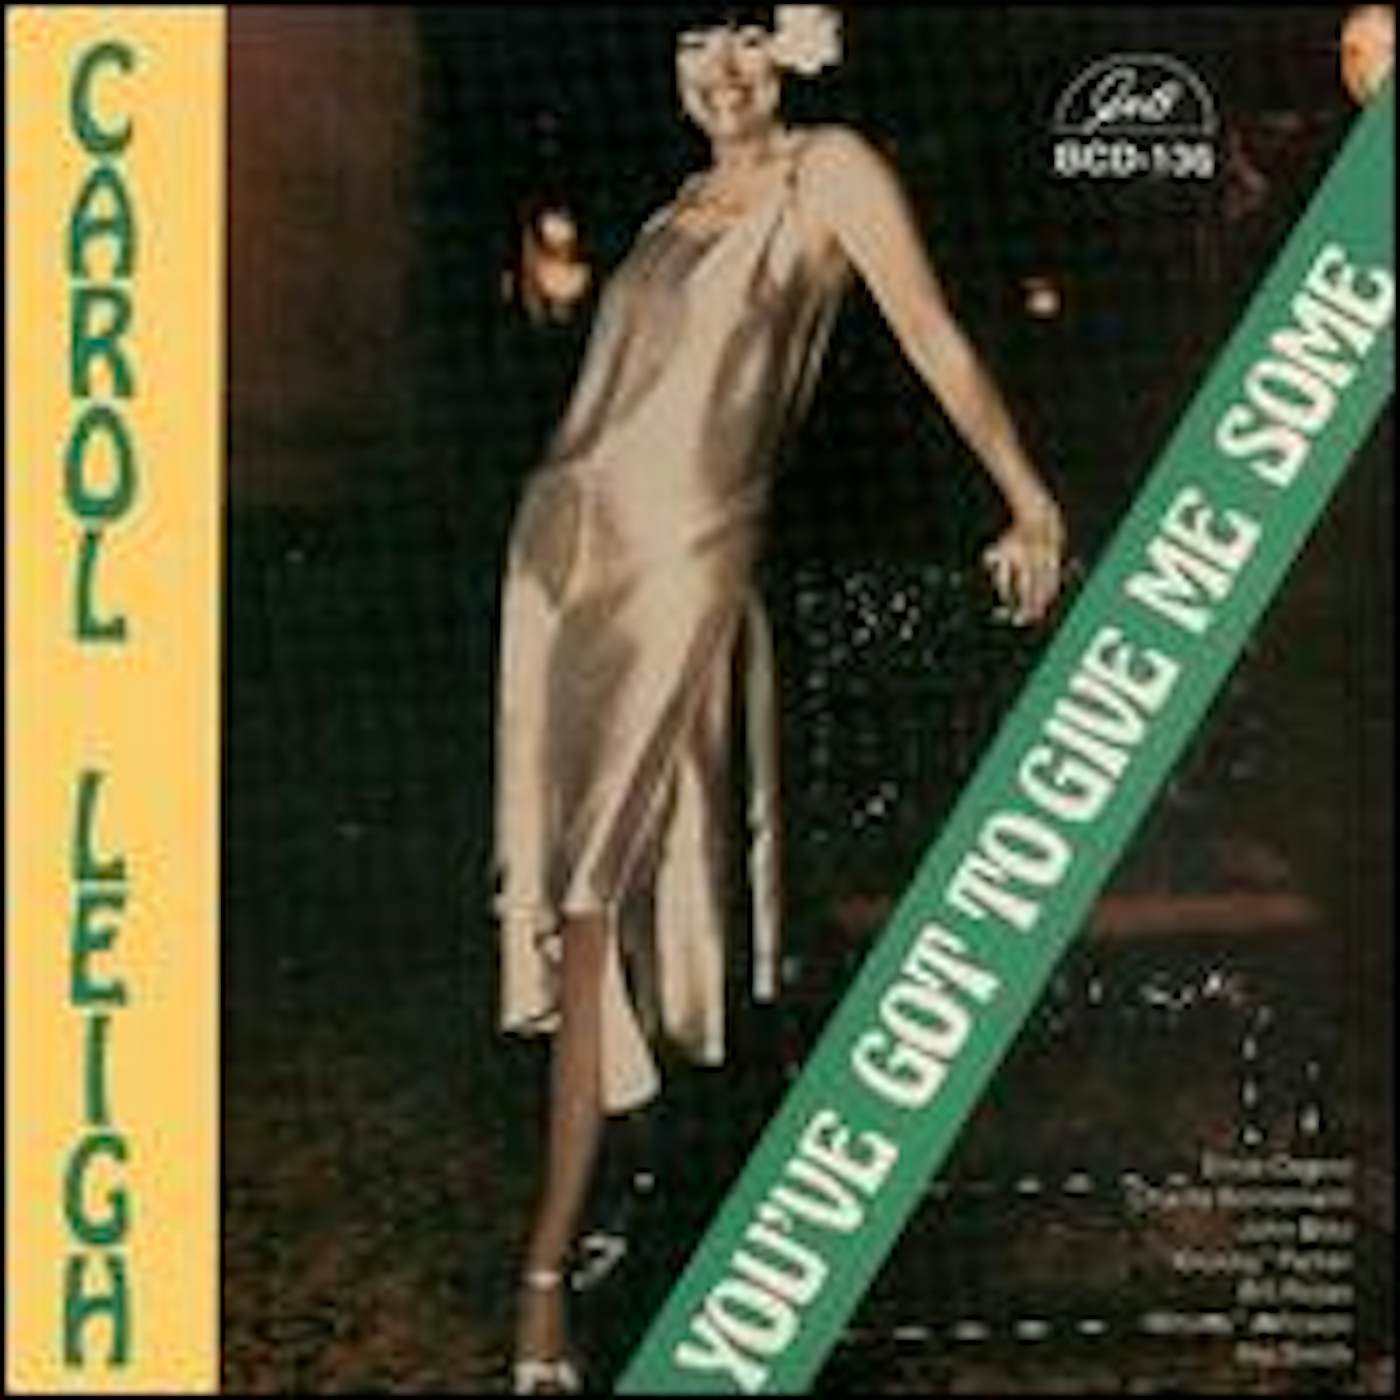 Carol Leigh YOU'VE GOT TO GIVE ME SOME CD